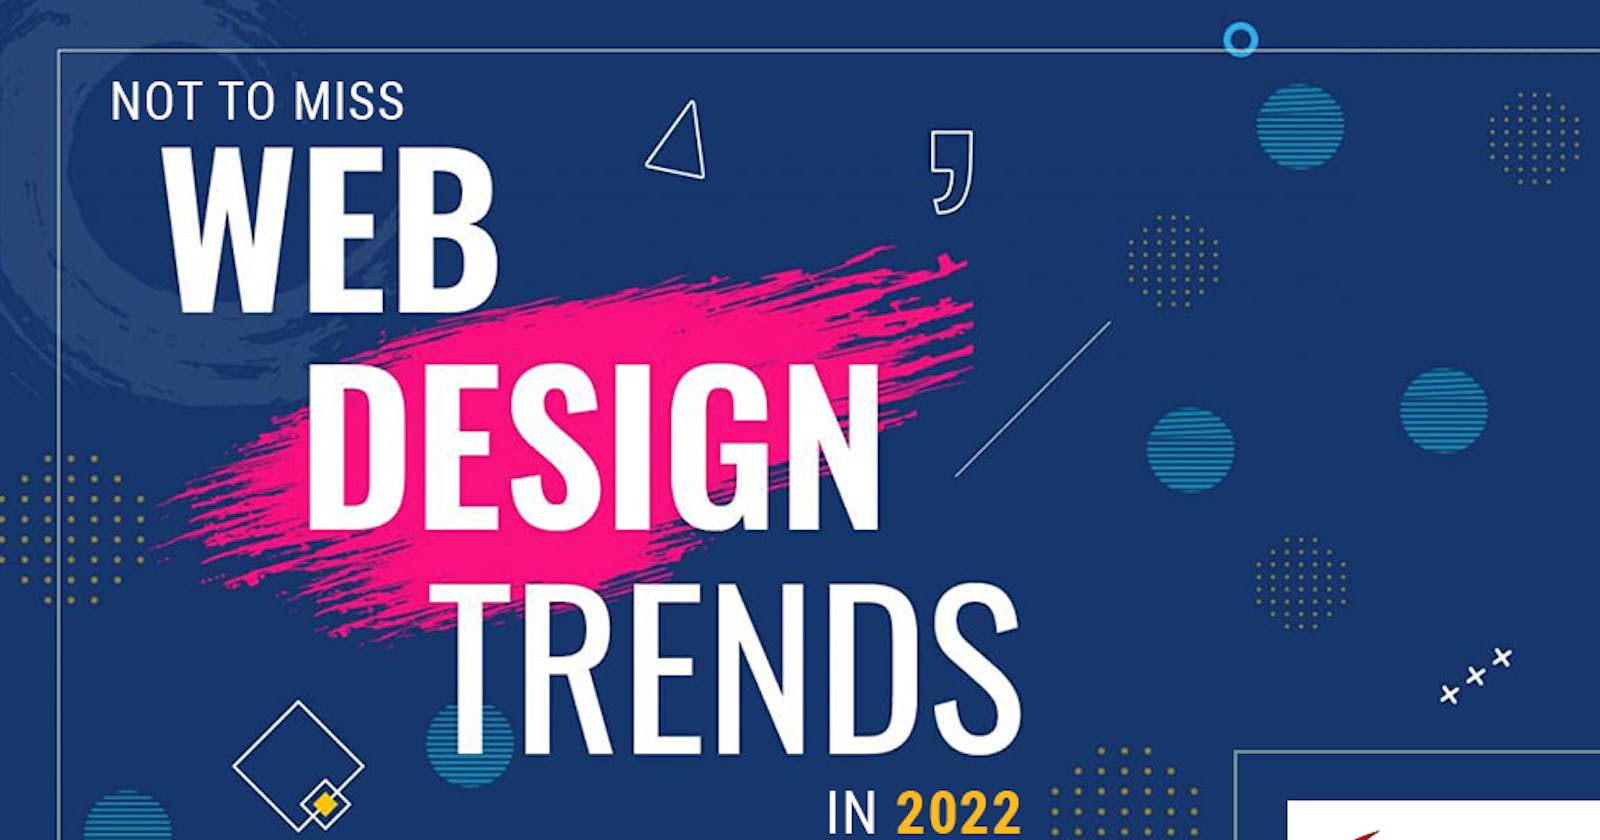 Not To Miss Web Design Trends in 2022